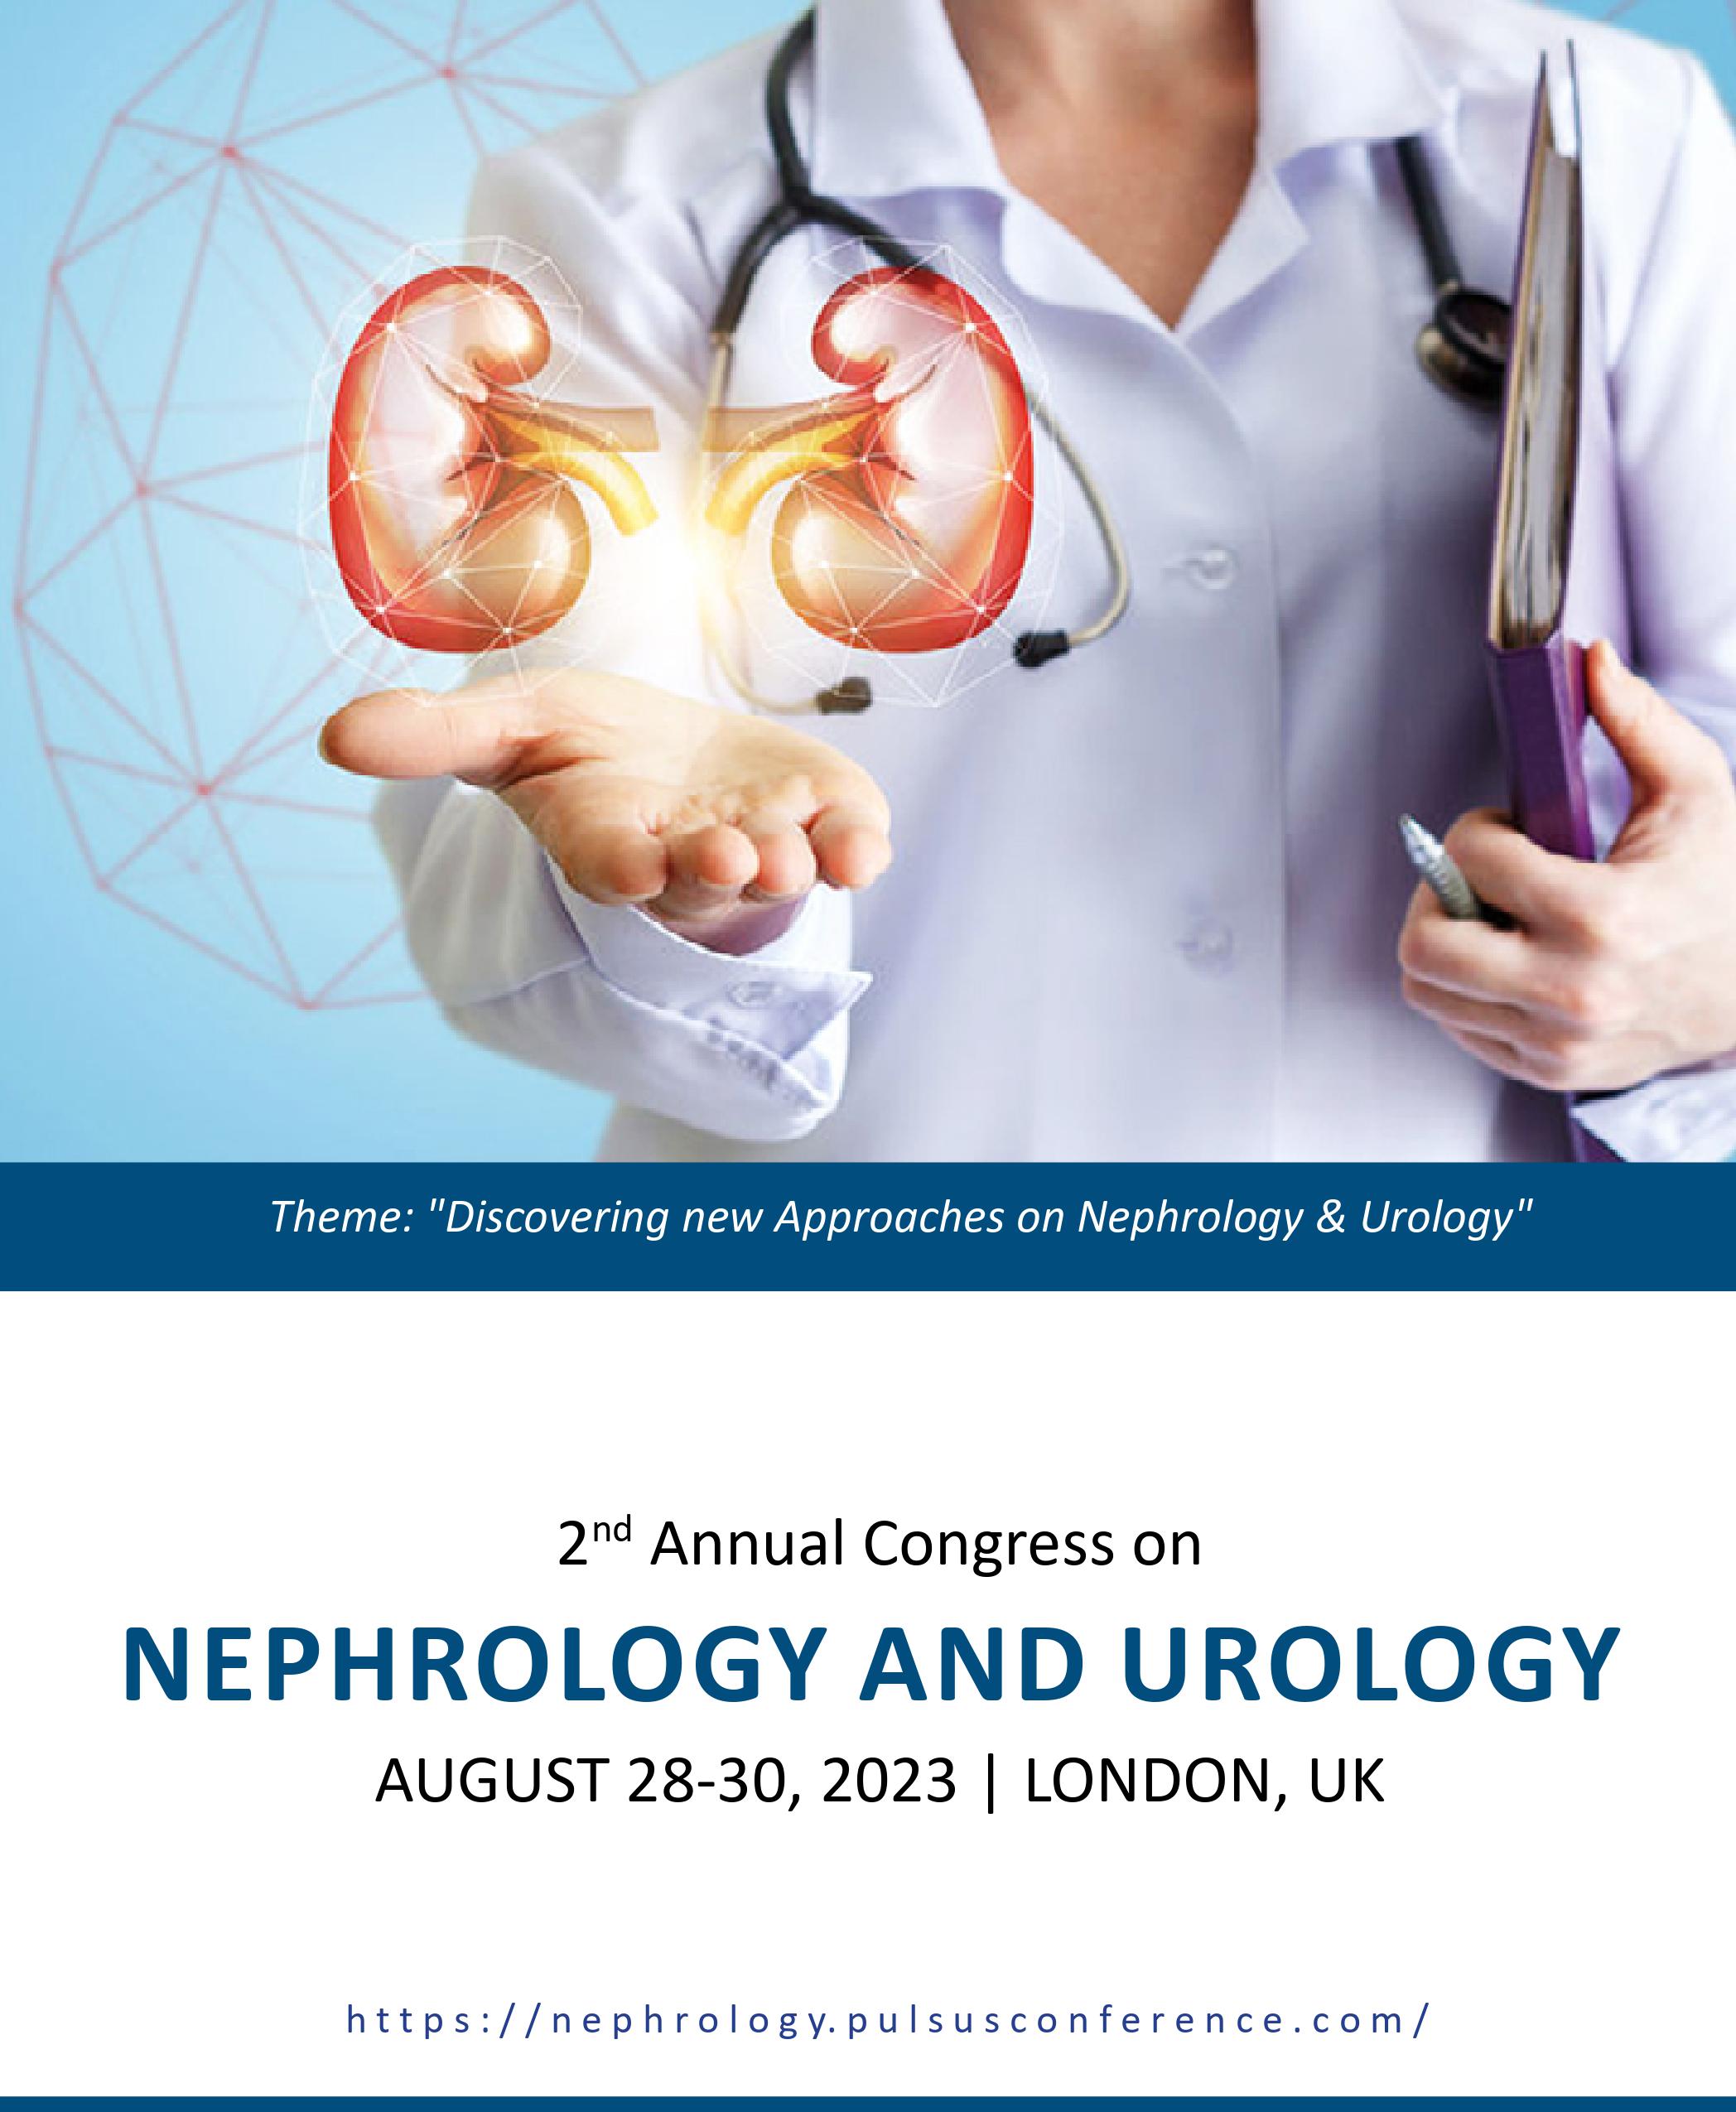 2nd Annual Conference on Nephrology and Urology, London, United Kingdom